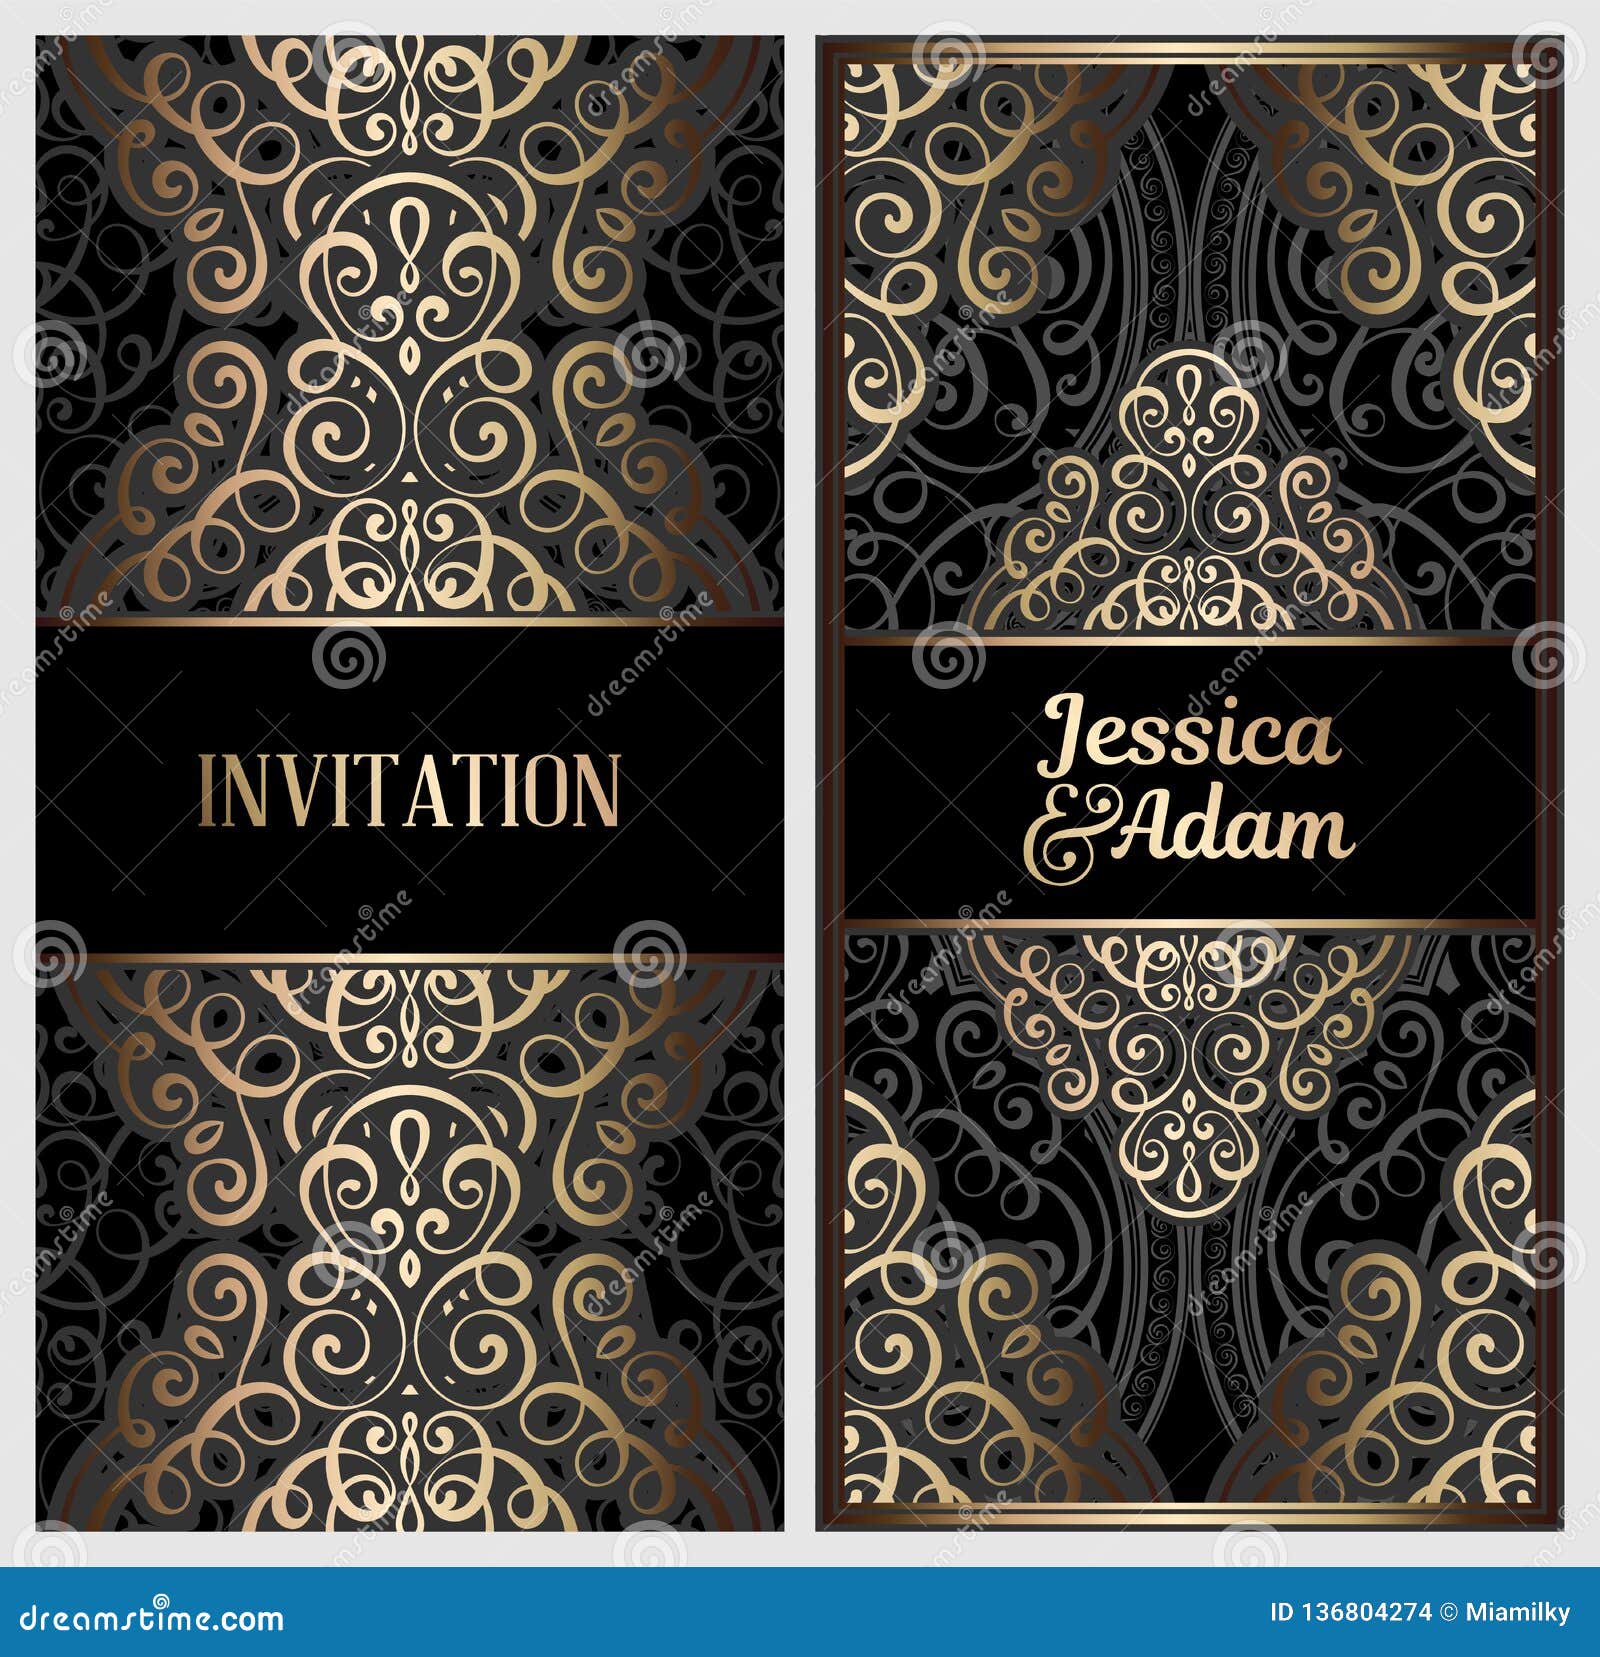 Black And Gold Luxury Wedding Invitation Card With Golden Shiny Eastern And  Baroque Rich Foliage. Ornate Islamic Background For Illustration 136804274  - Megapixl